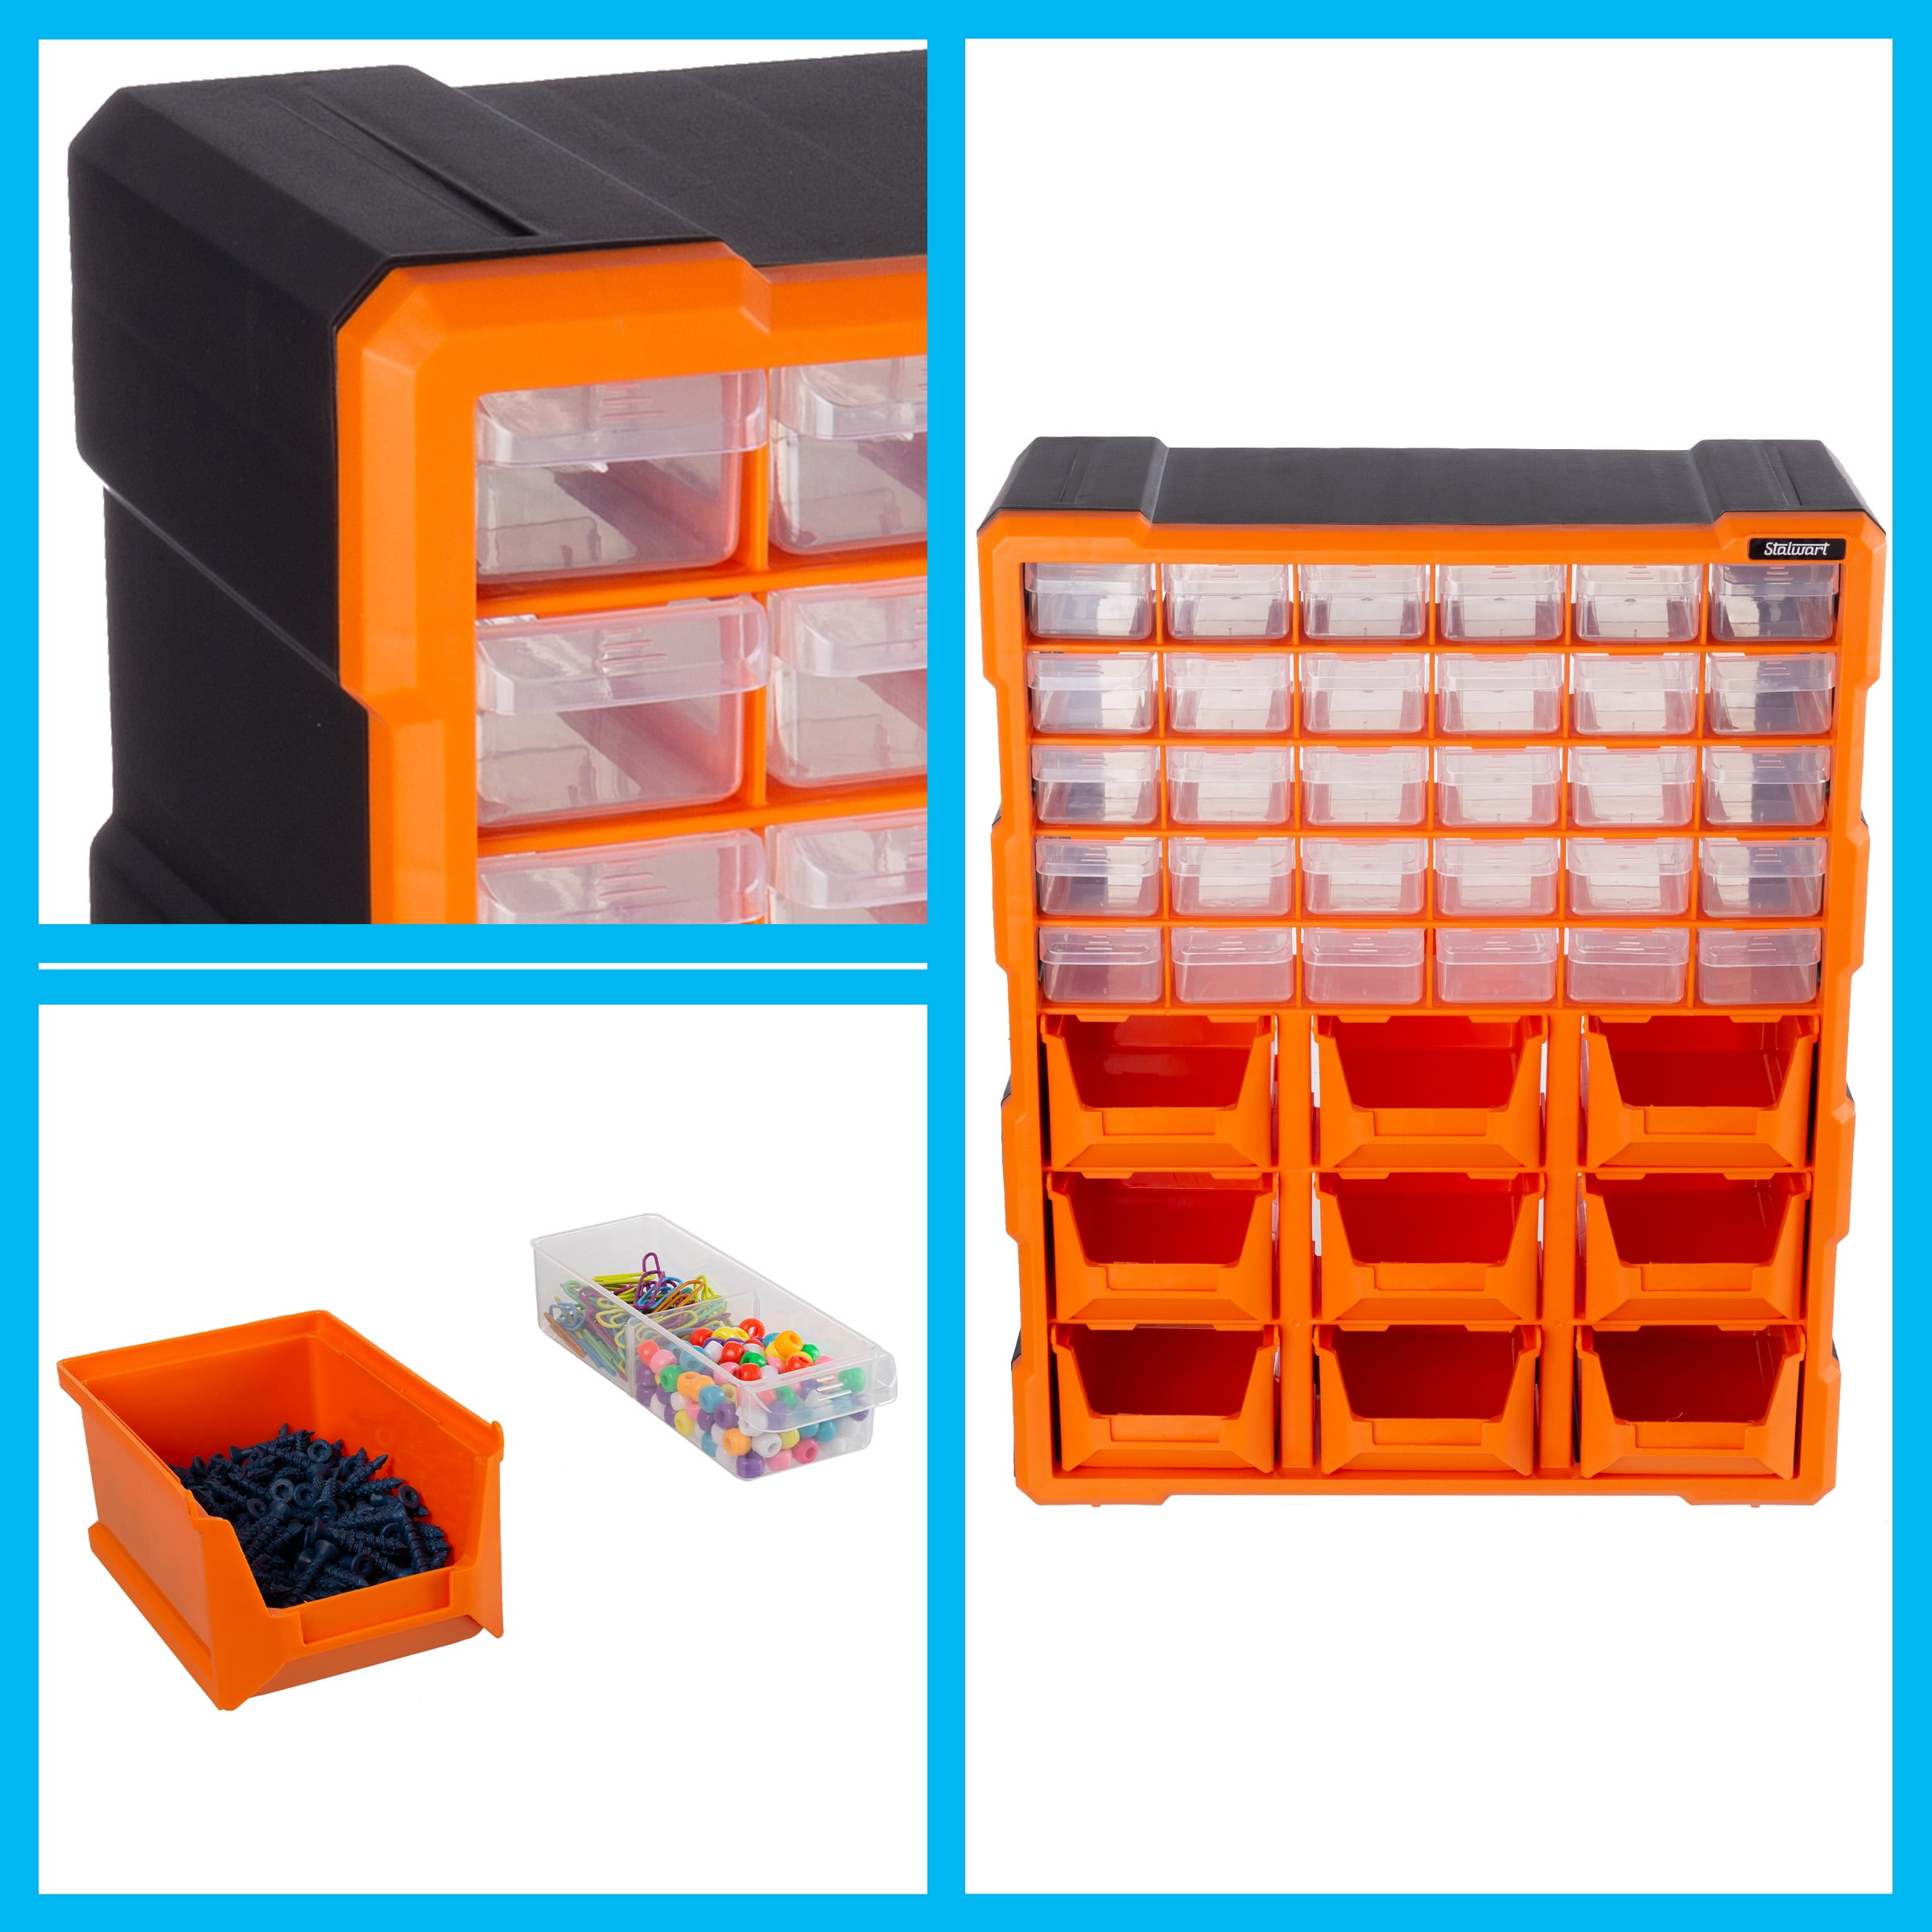 Storage Drawers-40 Compartment Organizer Desktop or Wall Mountable  Container for Hardware, Parts, Craft Supplies, Beads, Jewelry, and More by  Stalwart 